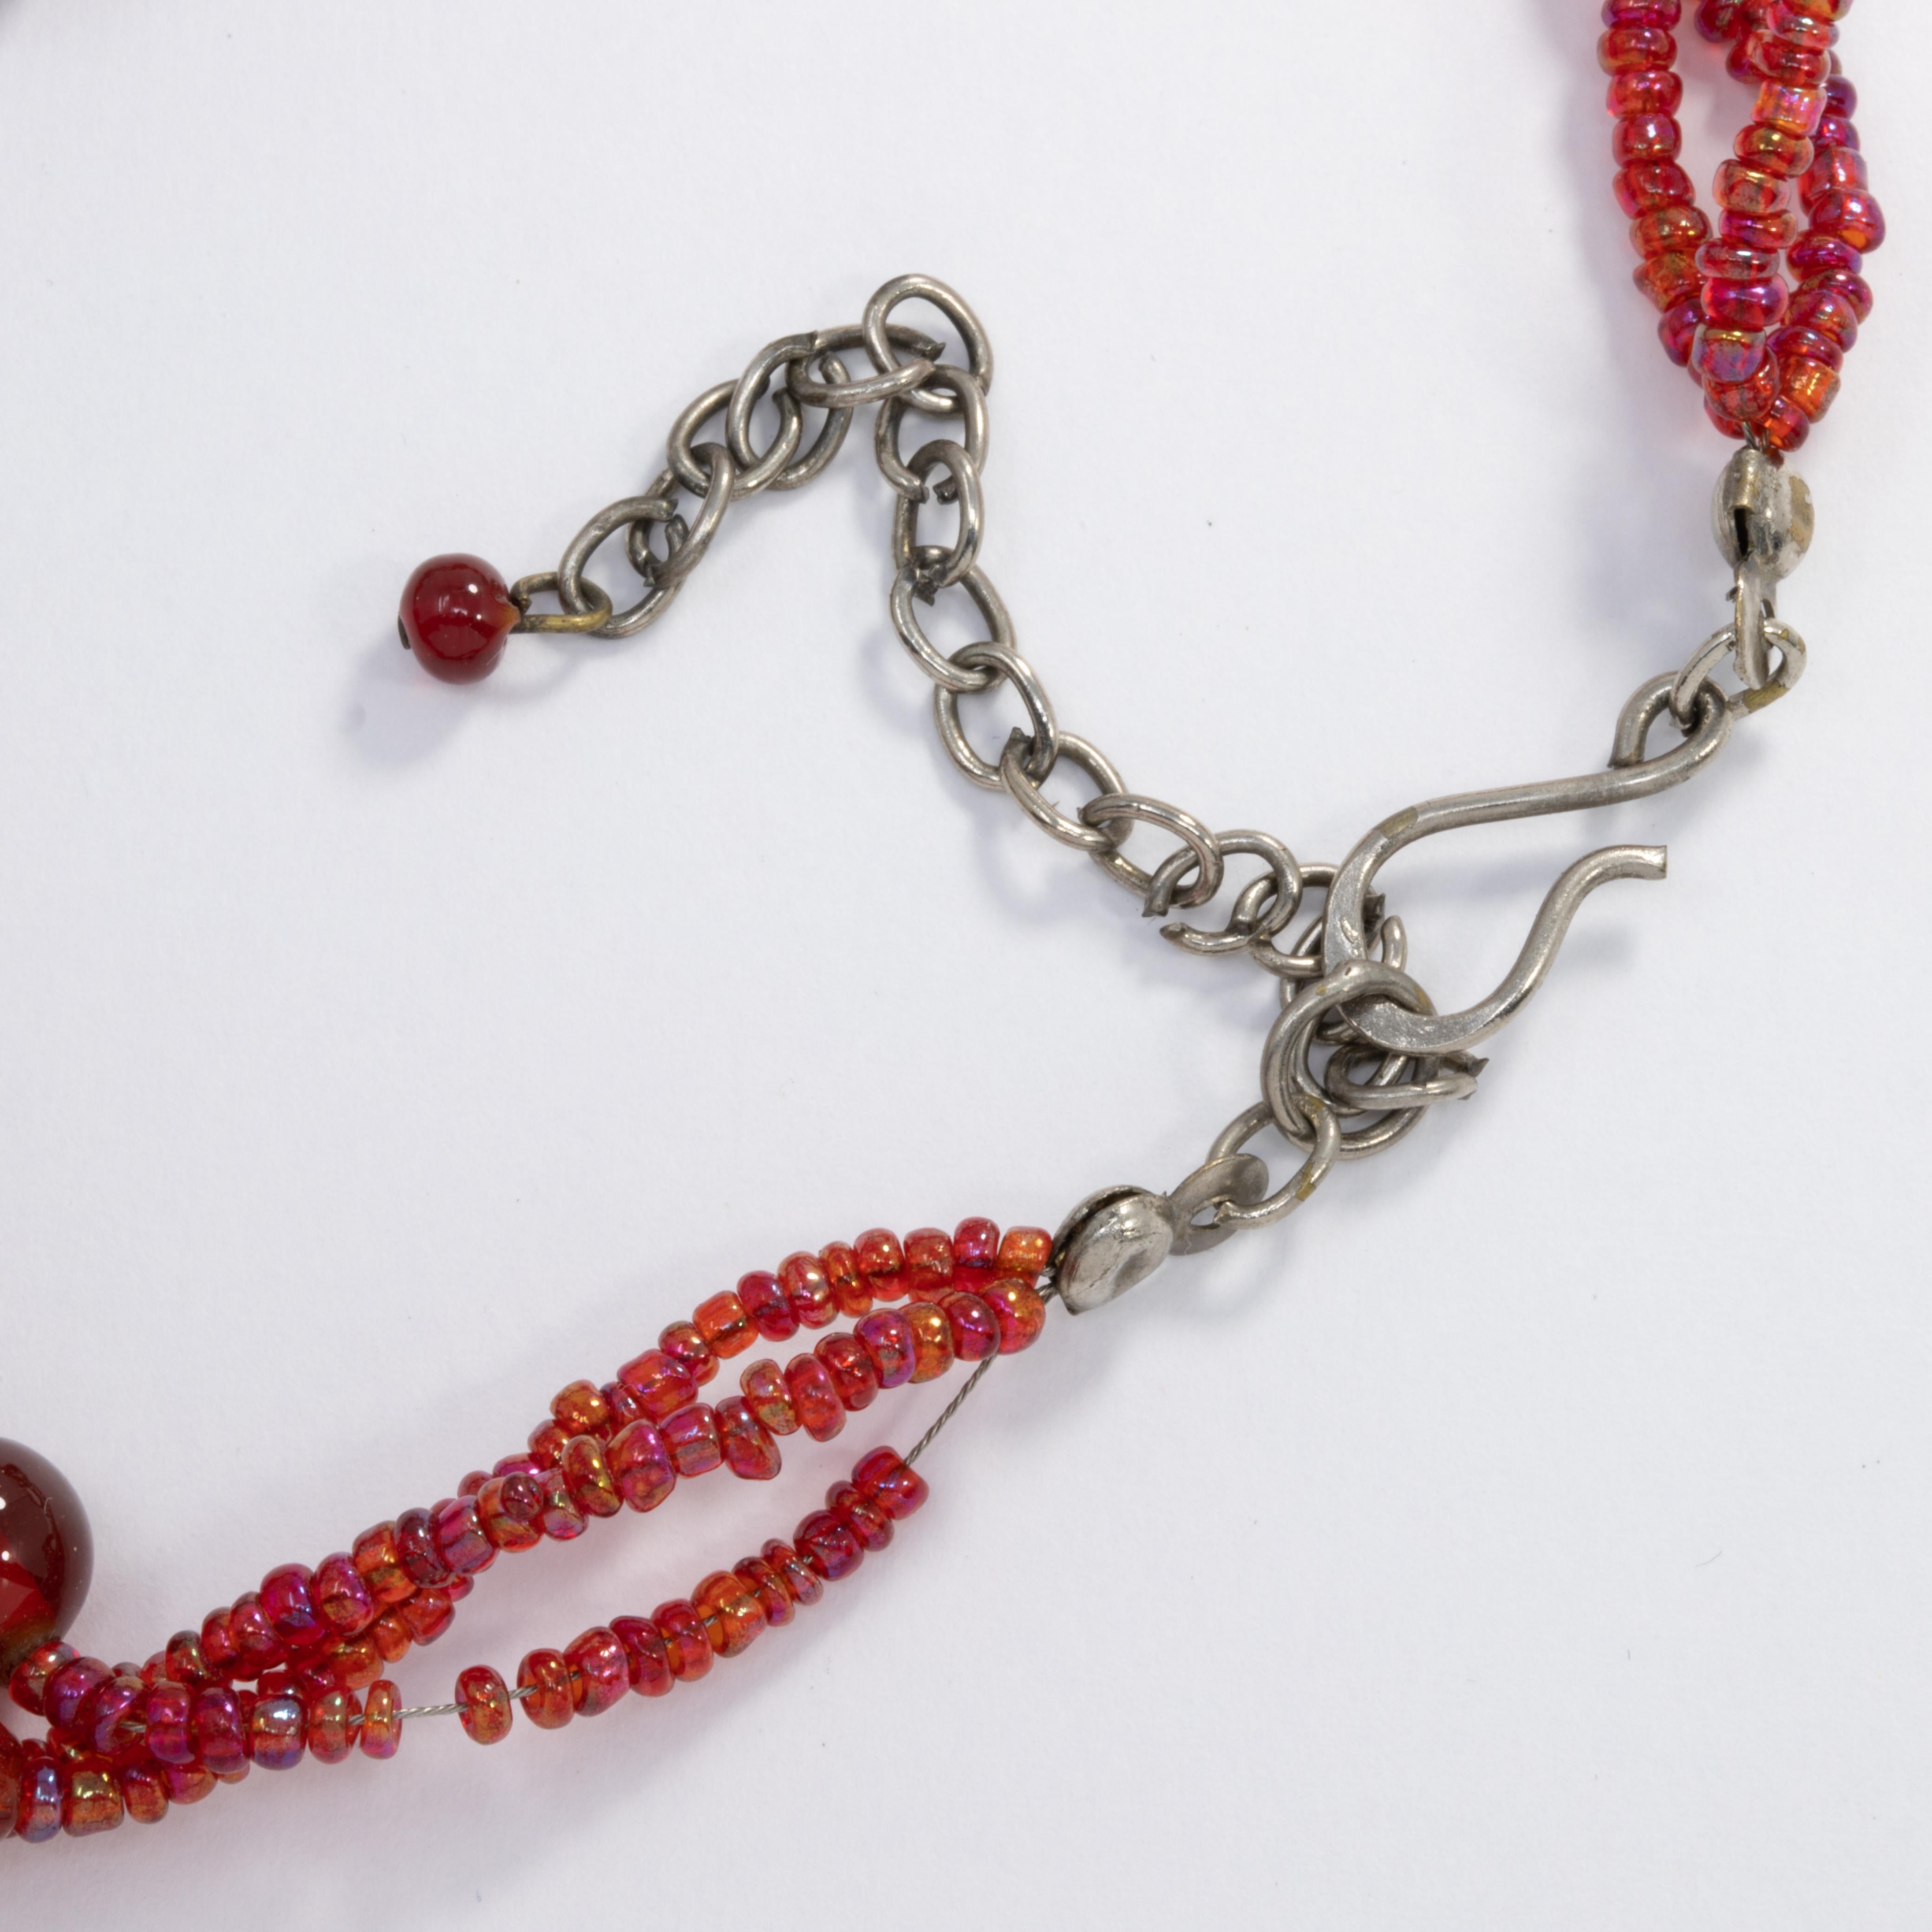 red and black beads necklace